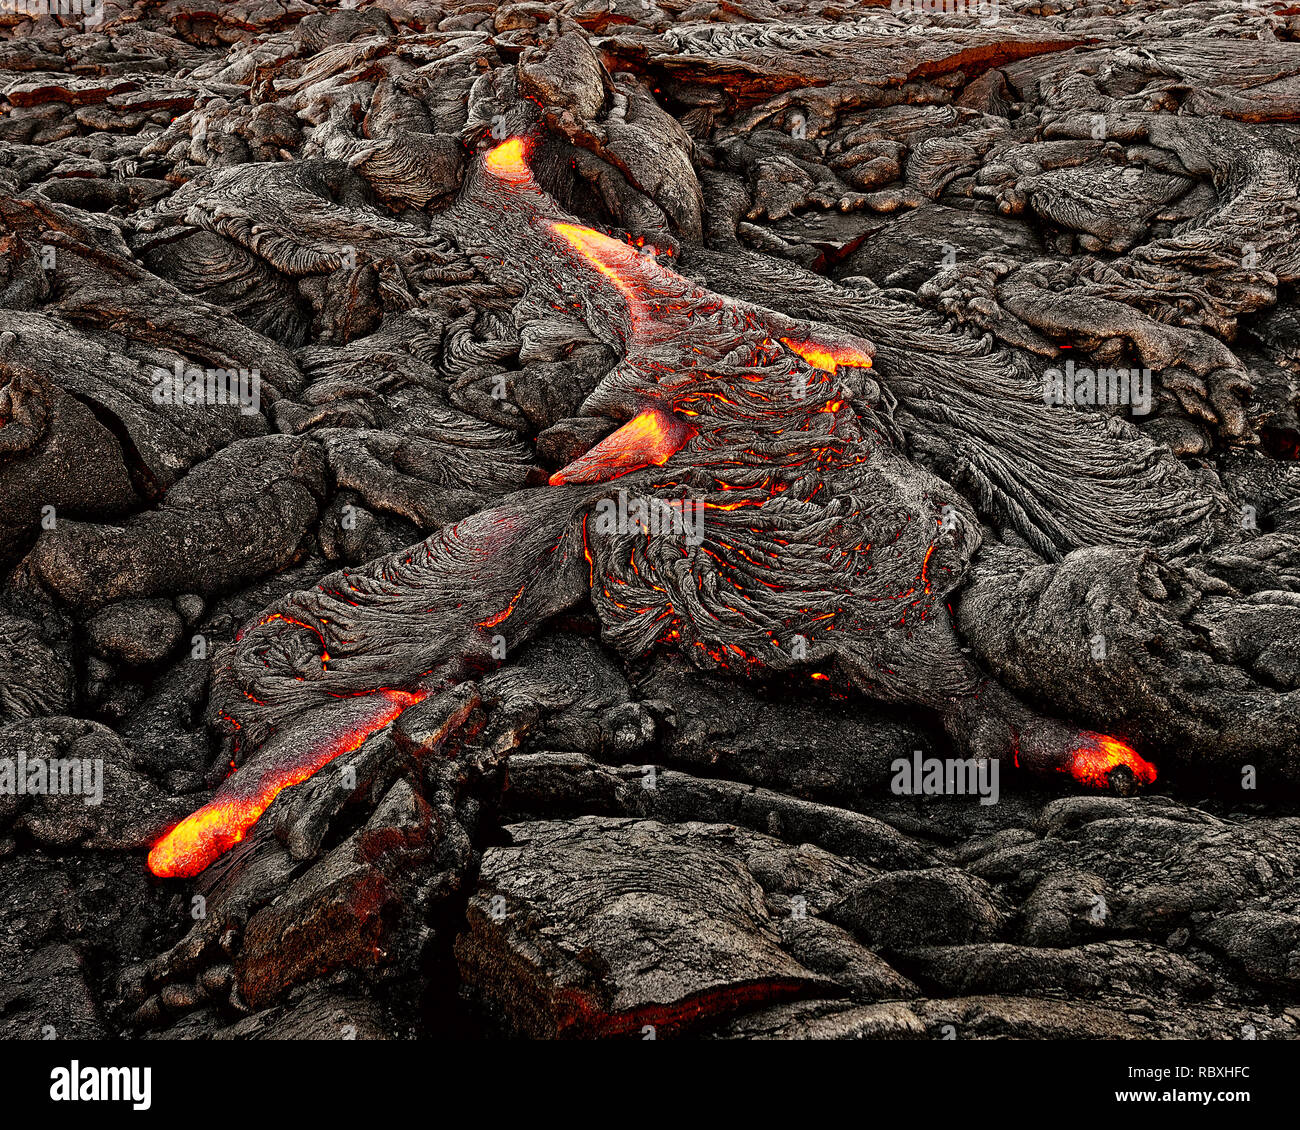 A lava flow emerges from an earth crevice and flows in a black volcanic landscape, glowing magma, first daylight - Location: Hawaii, Big Island, volca Stock Photo